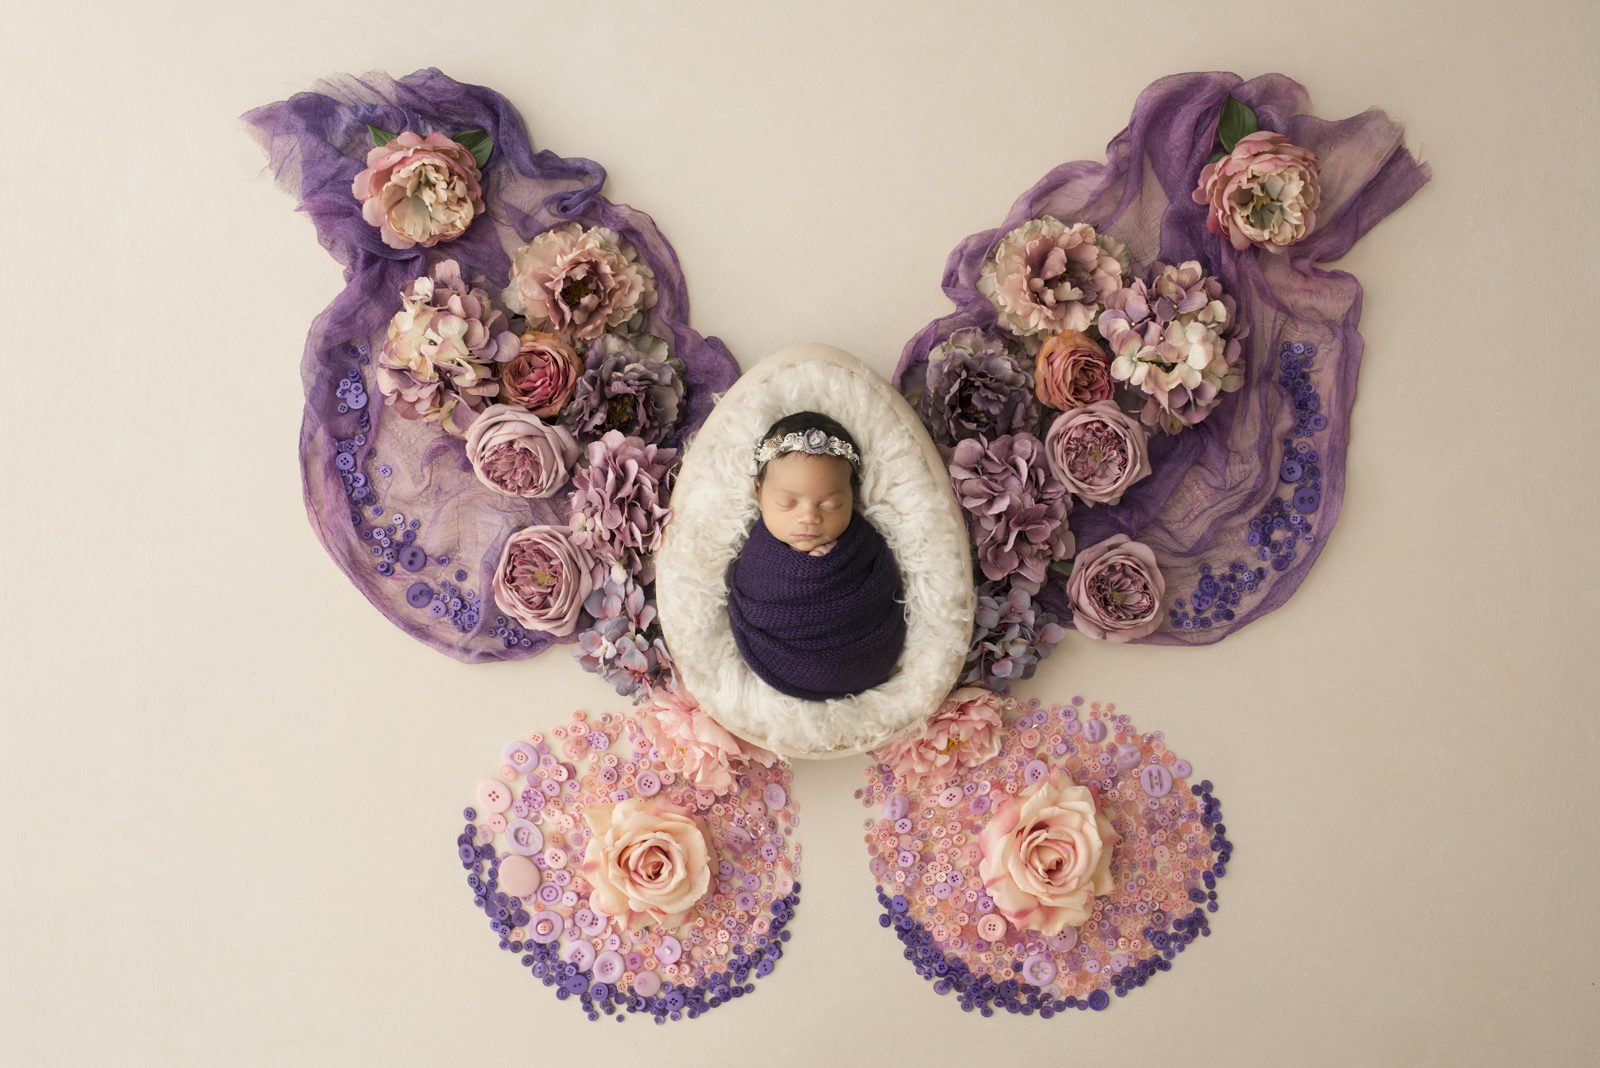 A baby in a purple butterfly shaped frame.